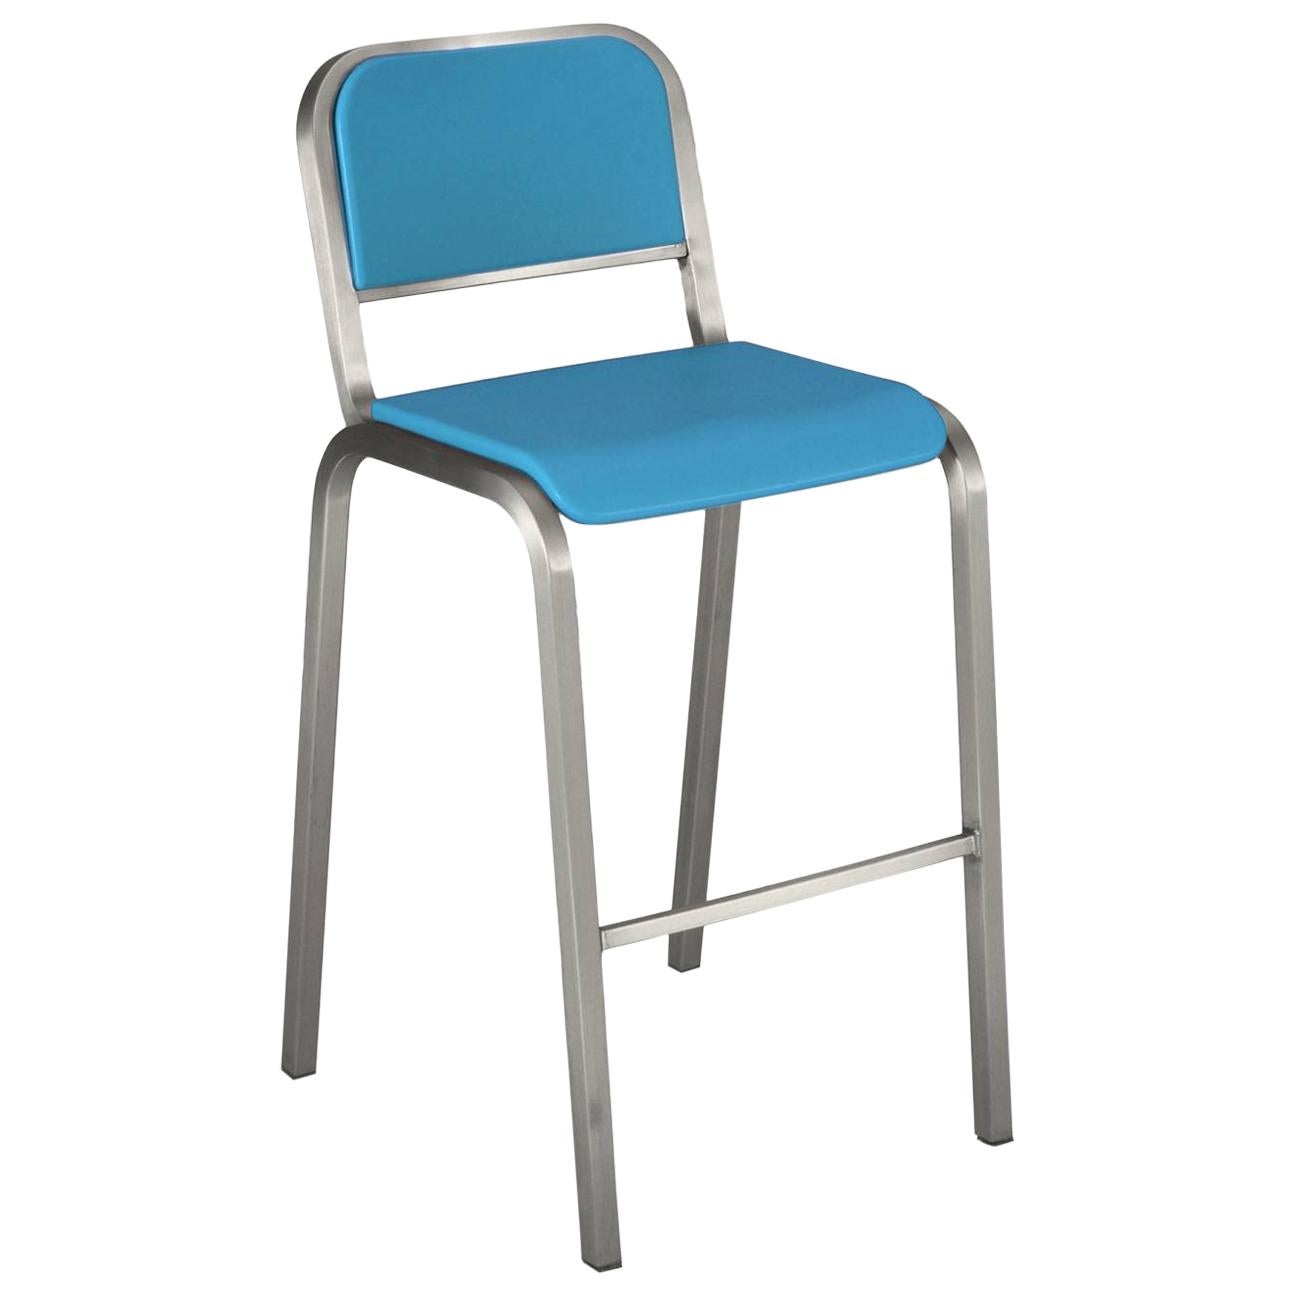 Emeco Nine-0 Barstool in Brushed Aluminum and Blue by Ettore Sottsass